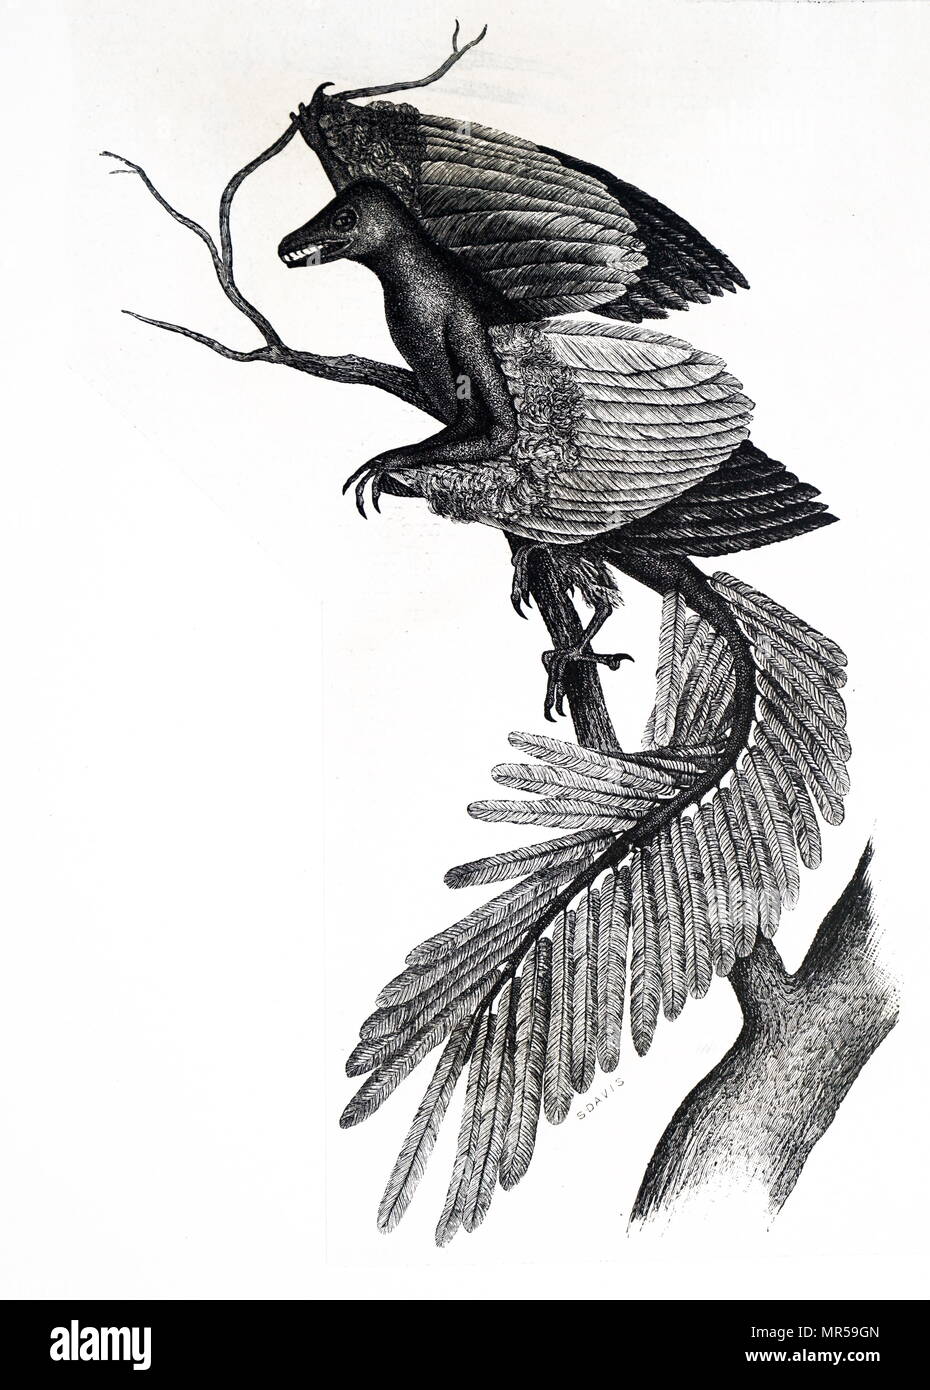 Engraving depicting a Archaeopteryx, is a genus of bird-like dinosaurs that is transitional between non-avian feathered dinosaurs and modern birds. Dated 19th century Stock Photo